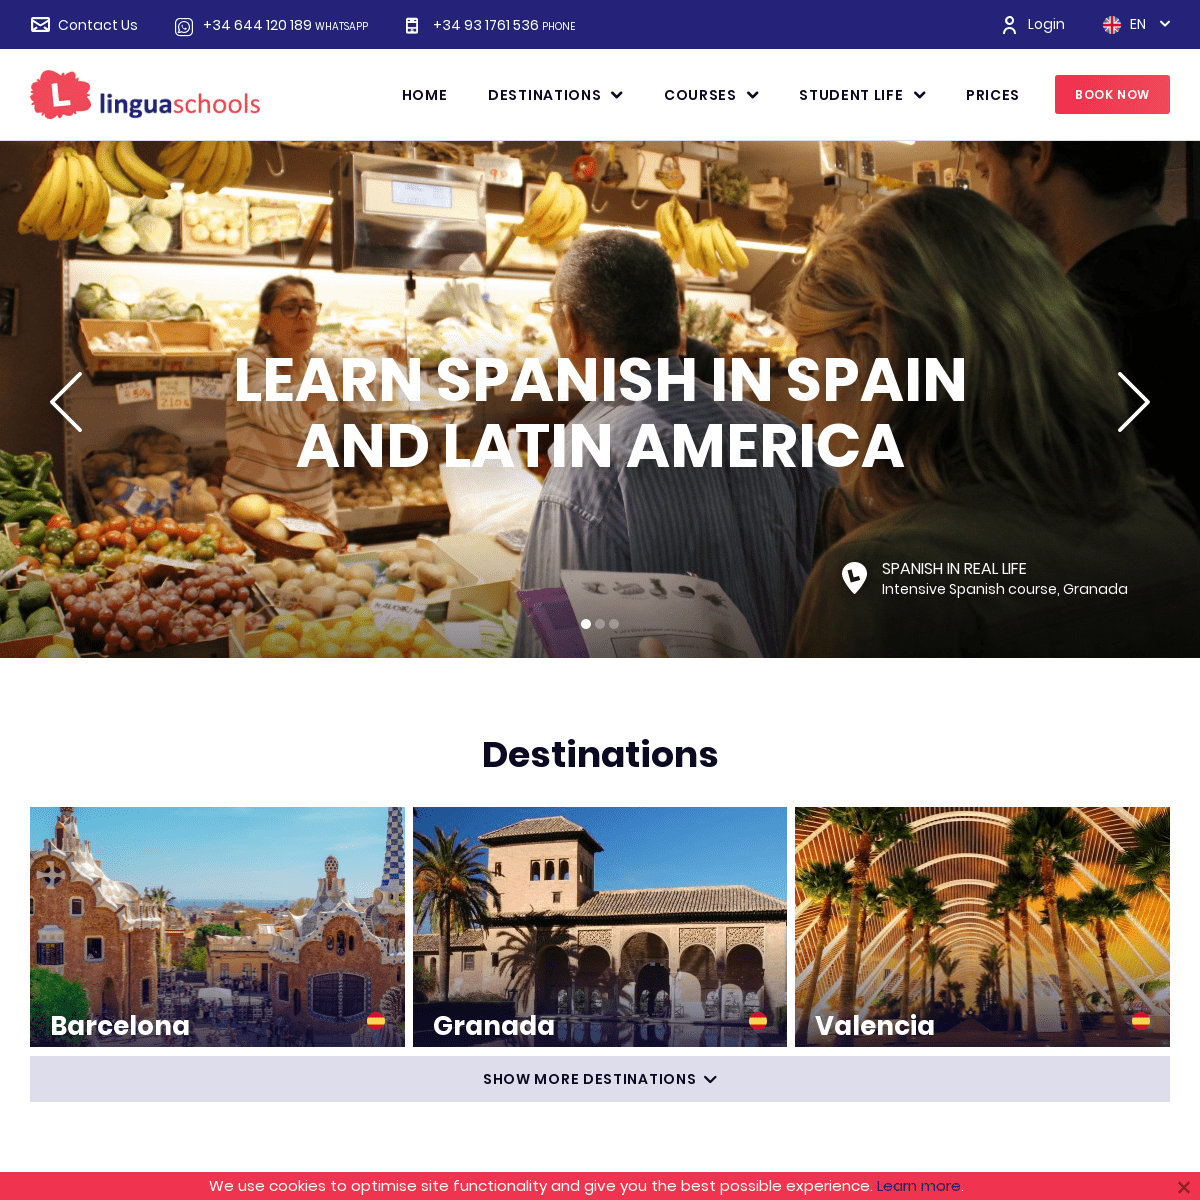 Linguaschools - Learn Spanish abroad in Spain and Latin America